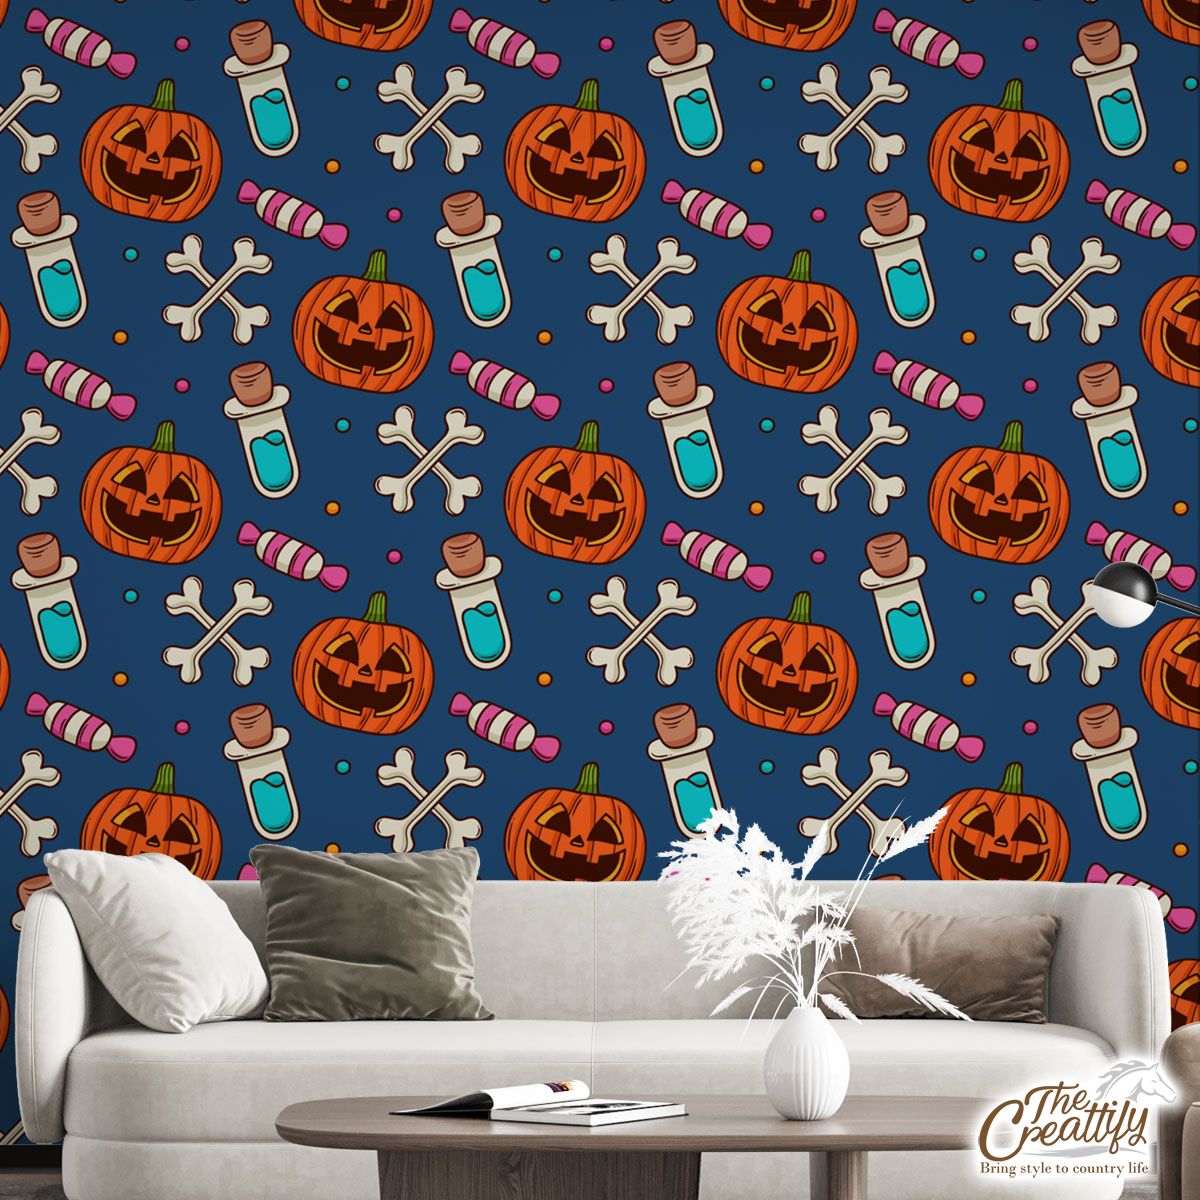 Halloween Scary Pumpkin Face With Candy And Bone Wall Mural